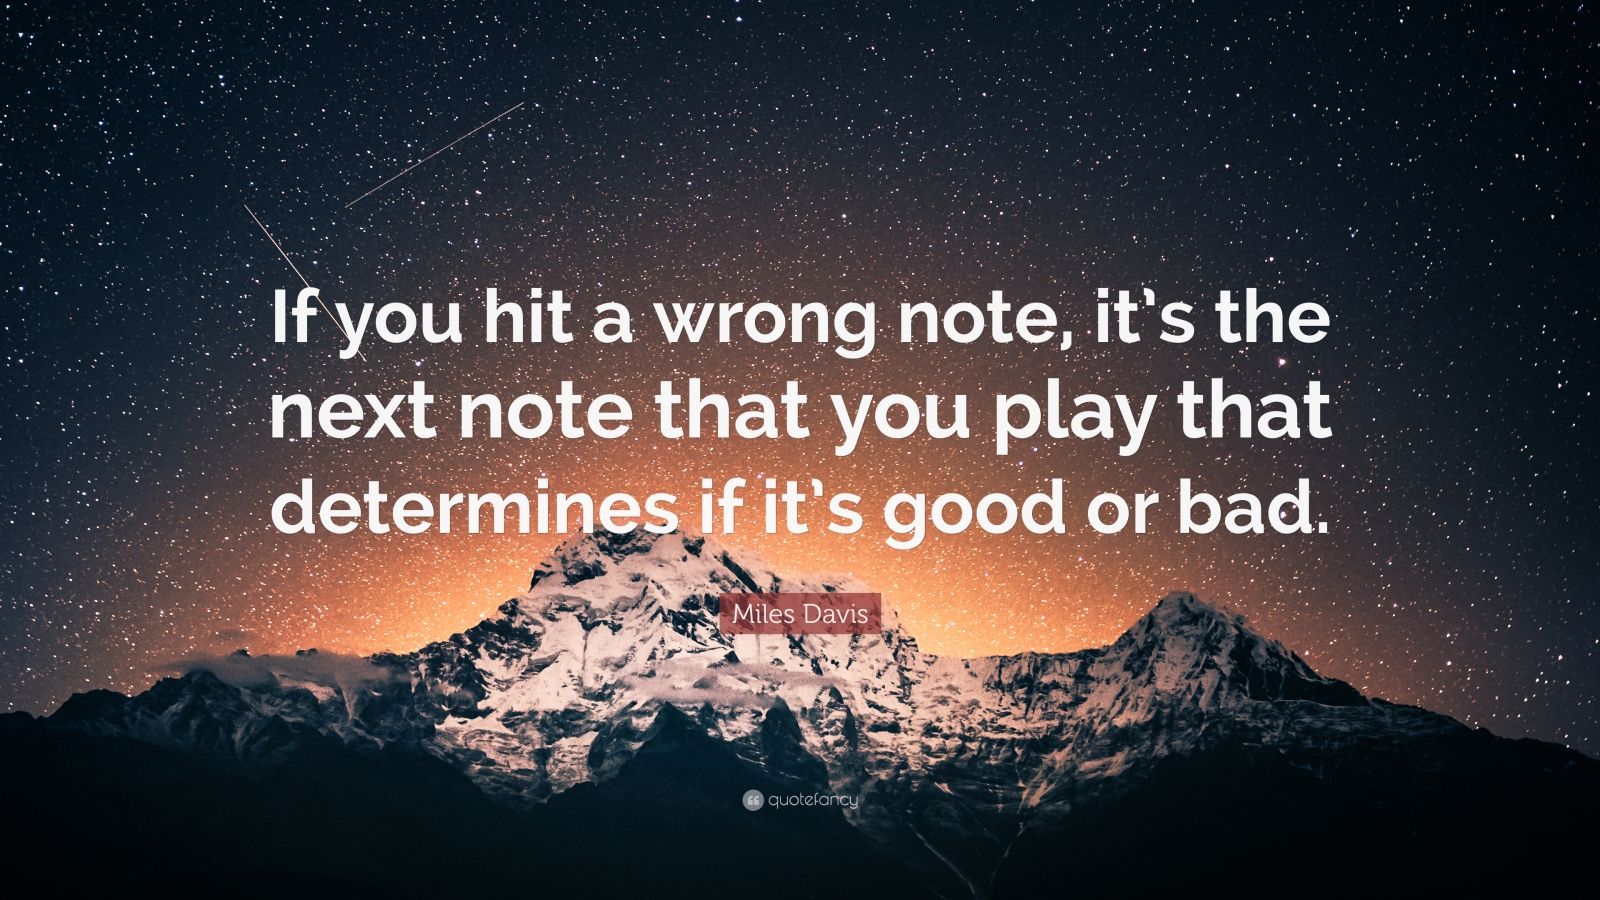 Miles Davis Quote: "If you hit a wrong note, it's the next note that you play that determines if ...